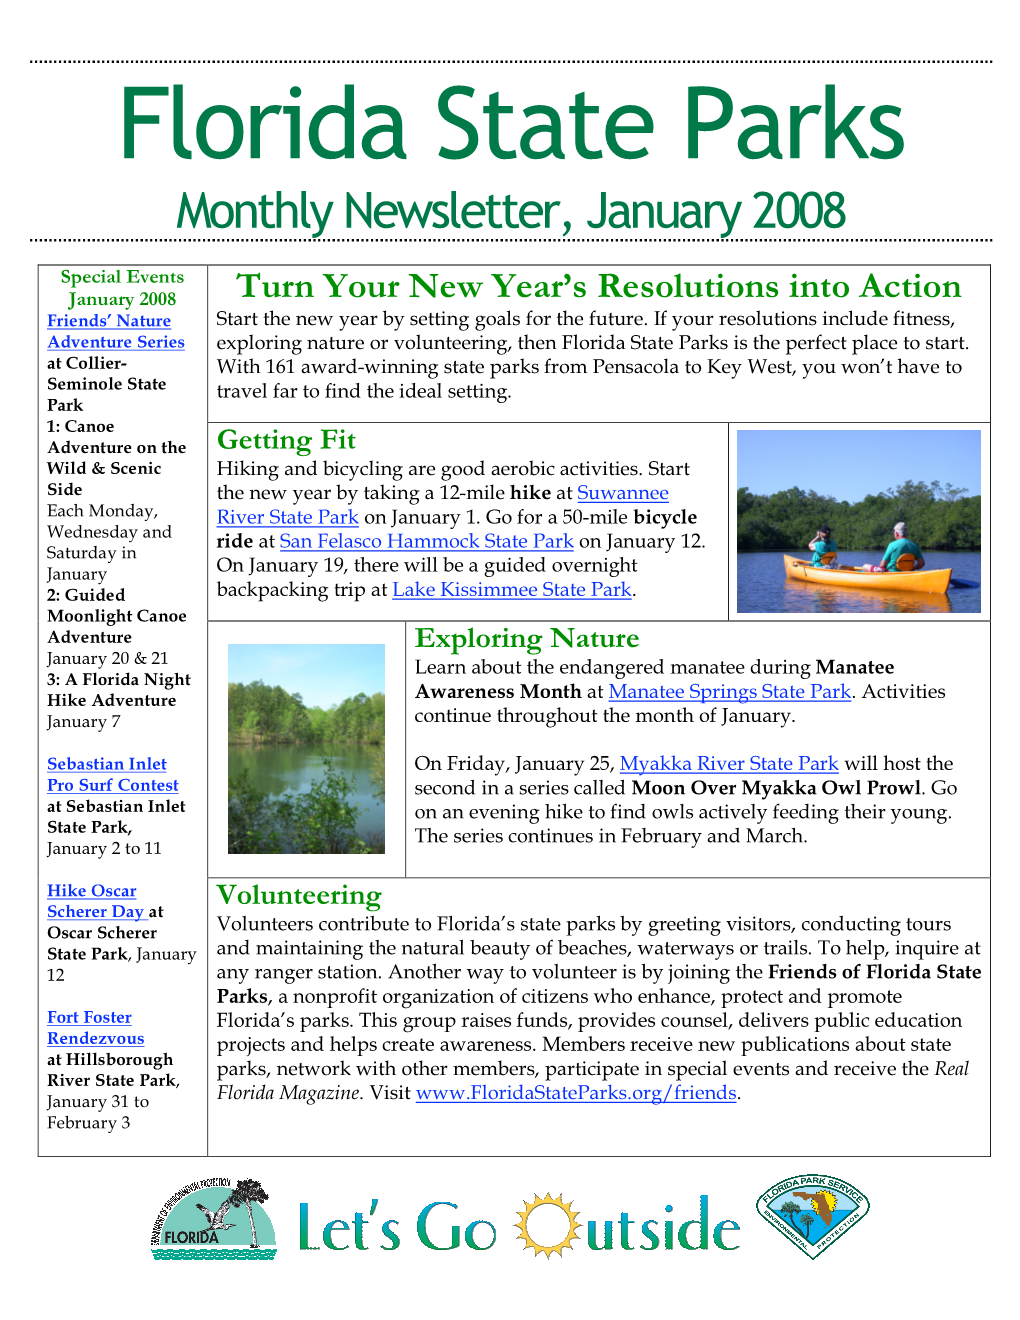 Florida State Parks Monthly Newsletter, January 2008